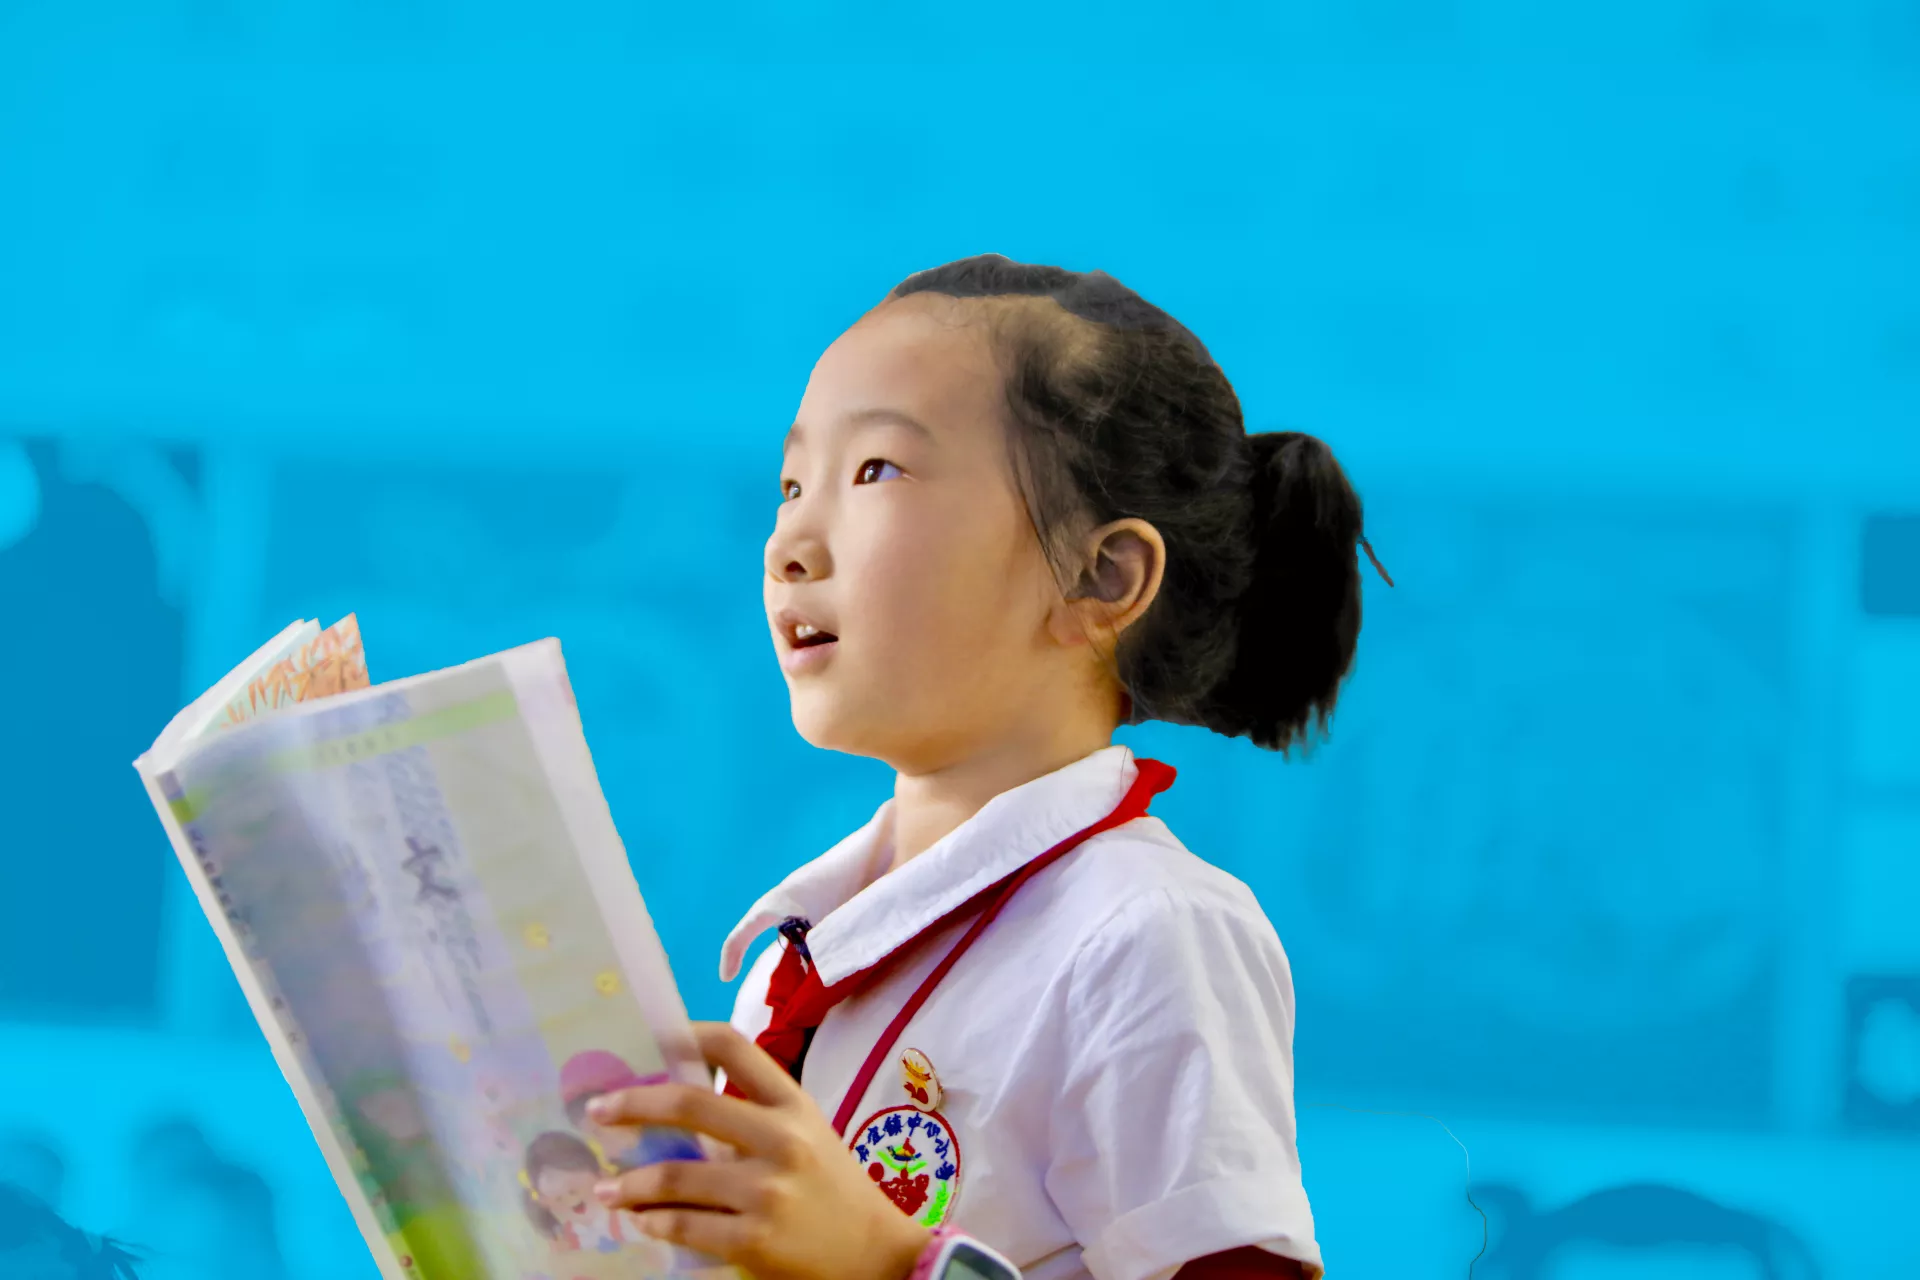 A girl reads during a Chinese class at a school in Sanjiang, Guangxi Zhuang Autonomous Region, in September 2017.